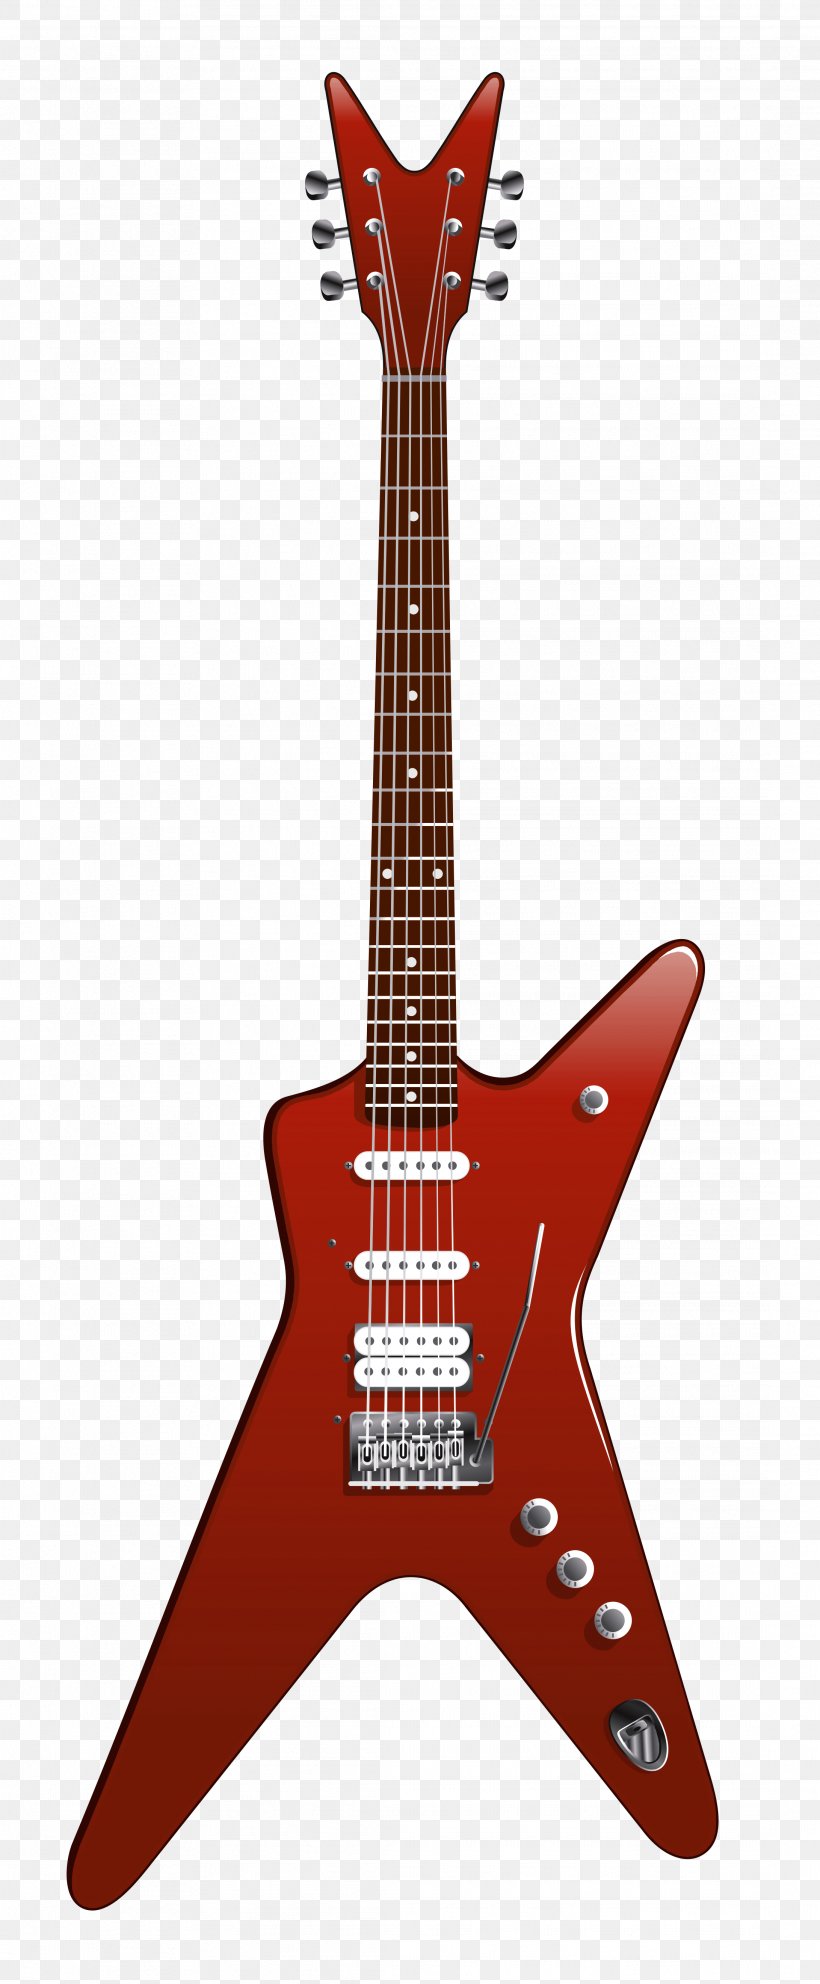 Fender Stratocaster Electric Guitar Musical Instruments Clip Art, PNG, 2183x5282px, Fender Stratocaster, Acoustic Electric Guitar, Acoustic Guitar, Bass Guitar, Classical Guitar Download Free